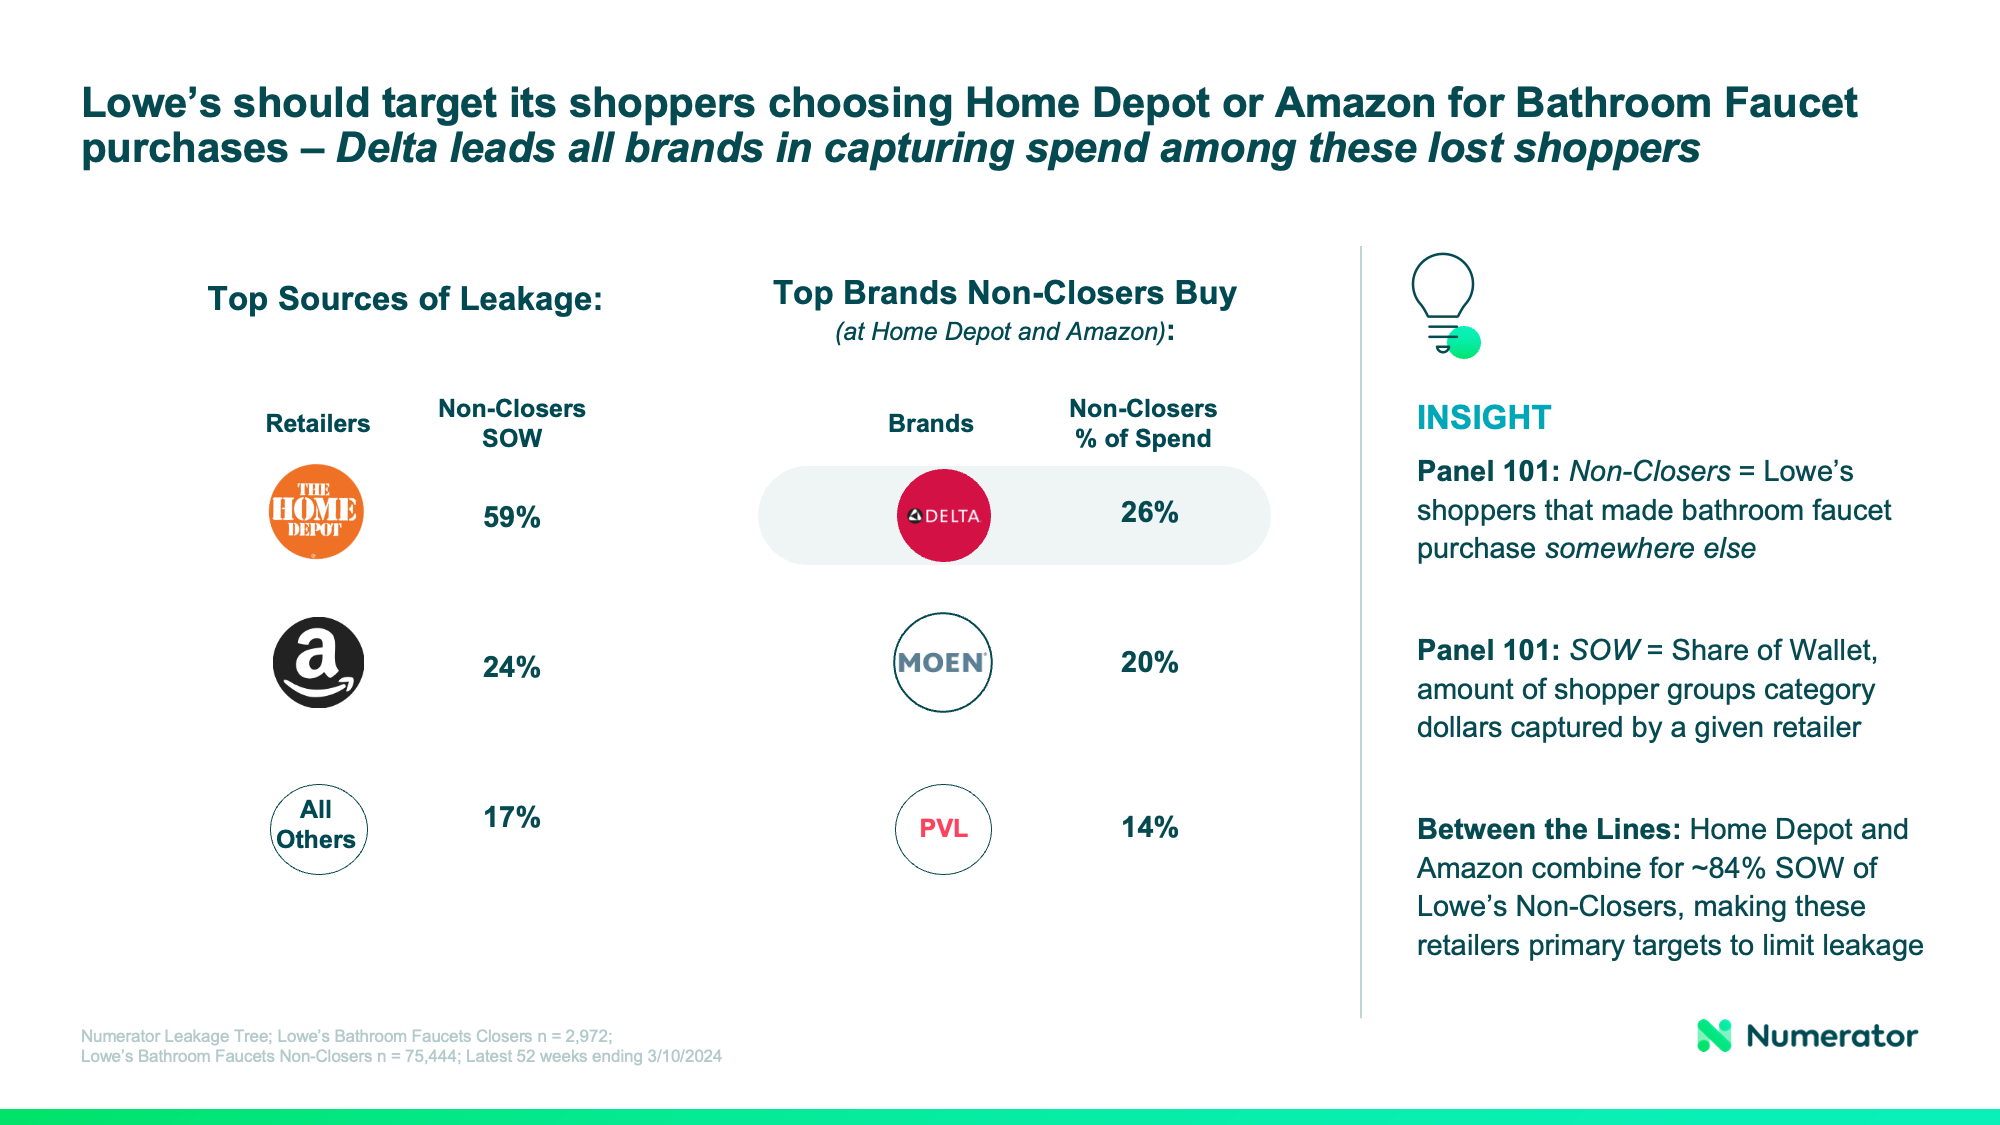 Lowe's should target its shoppers choosing Home Depot or Amazon for Bathroom Faucet purchases - Delta leads all brands in capturing spend among these lost shoppers